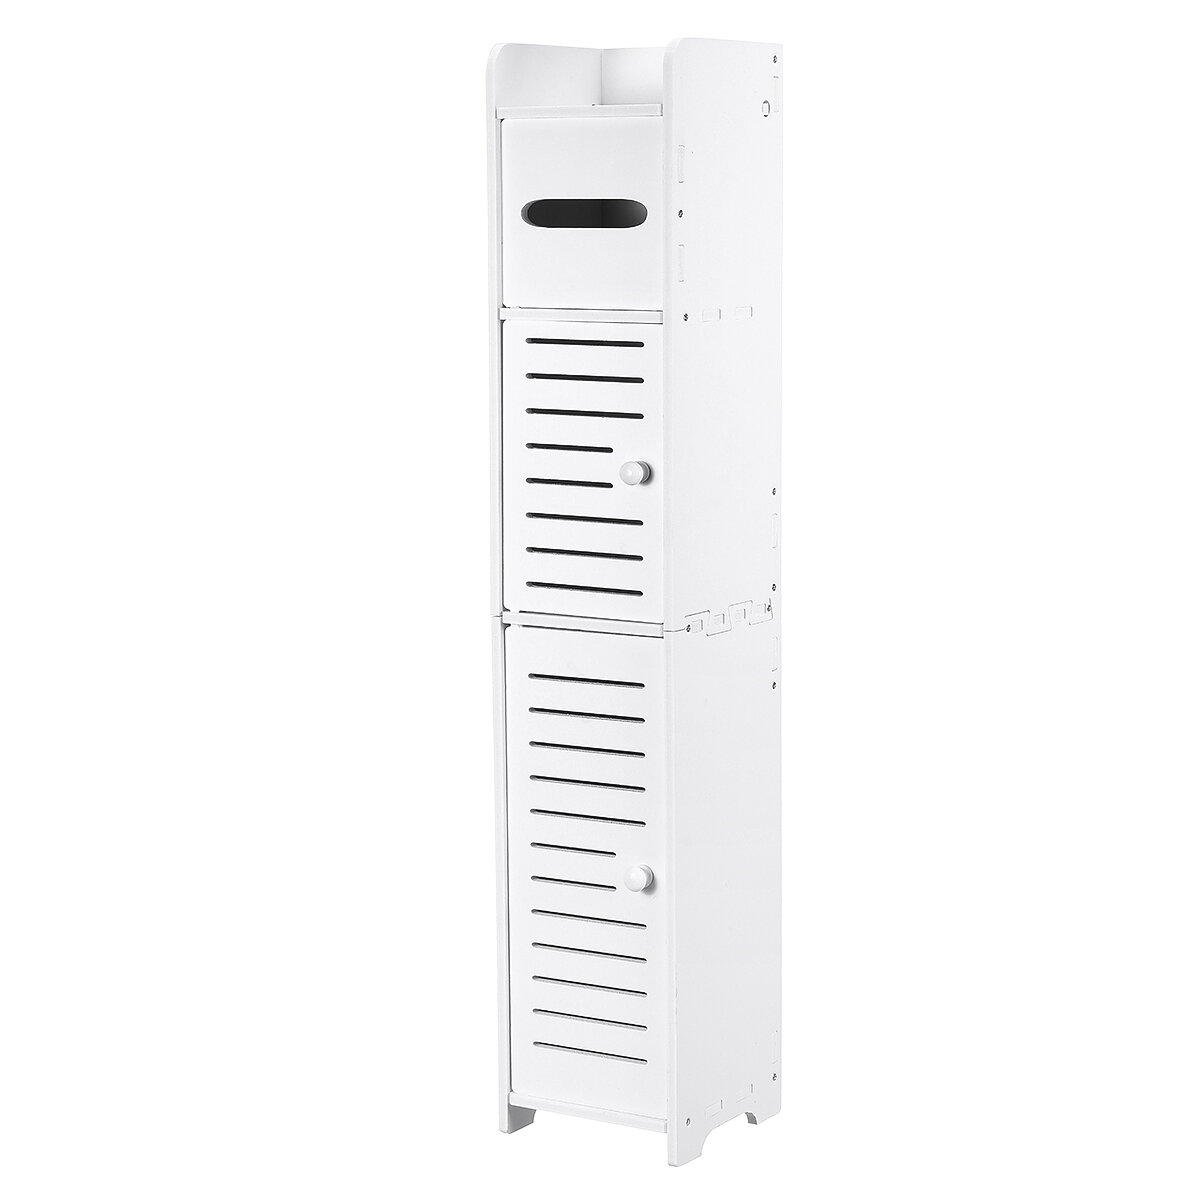 Image of 1PC Bathroom Side Cabinets Side Cabinets Racks Bathroom Floor Storage Cabinets Gap Storage Cabinets